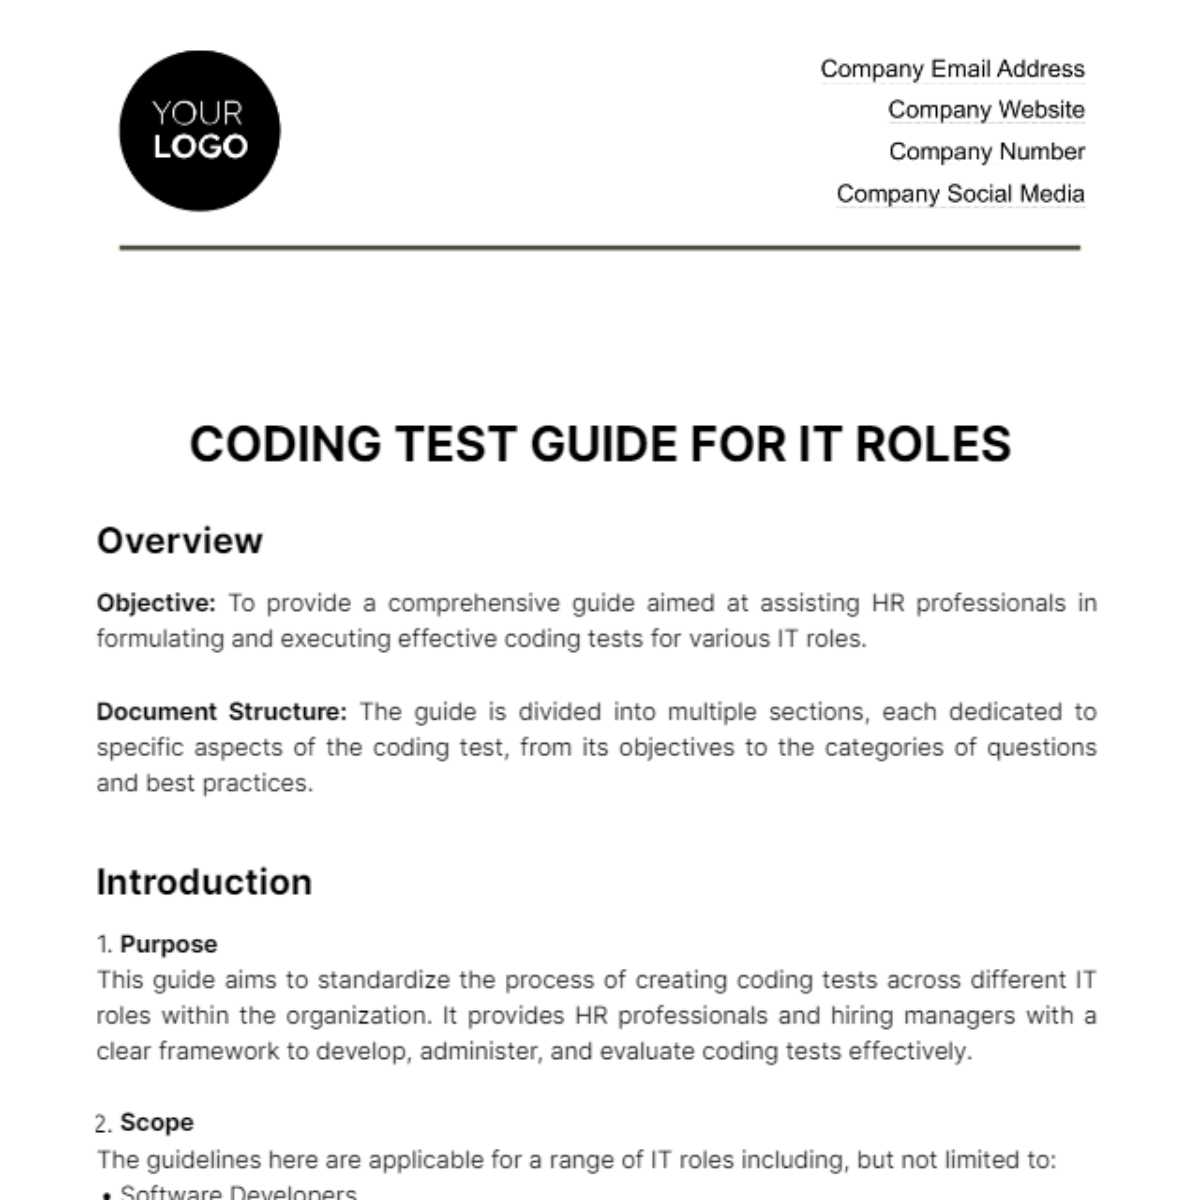 Free Coding Test Guide for IT Roles HR Template